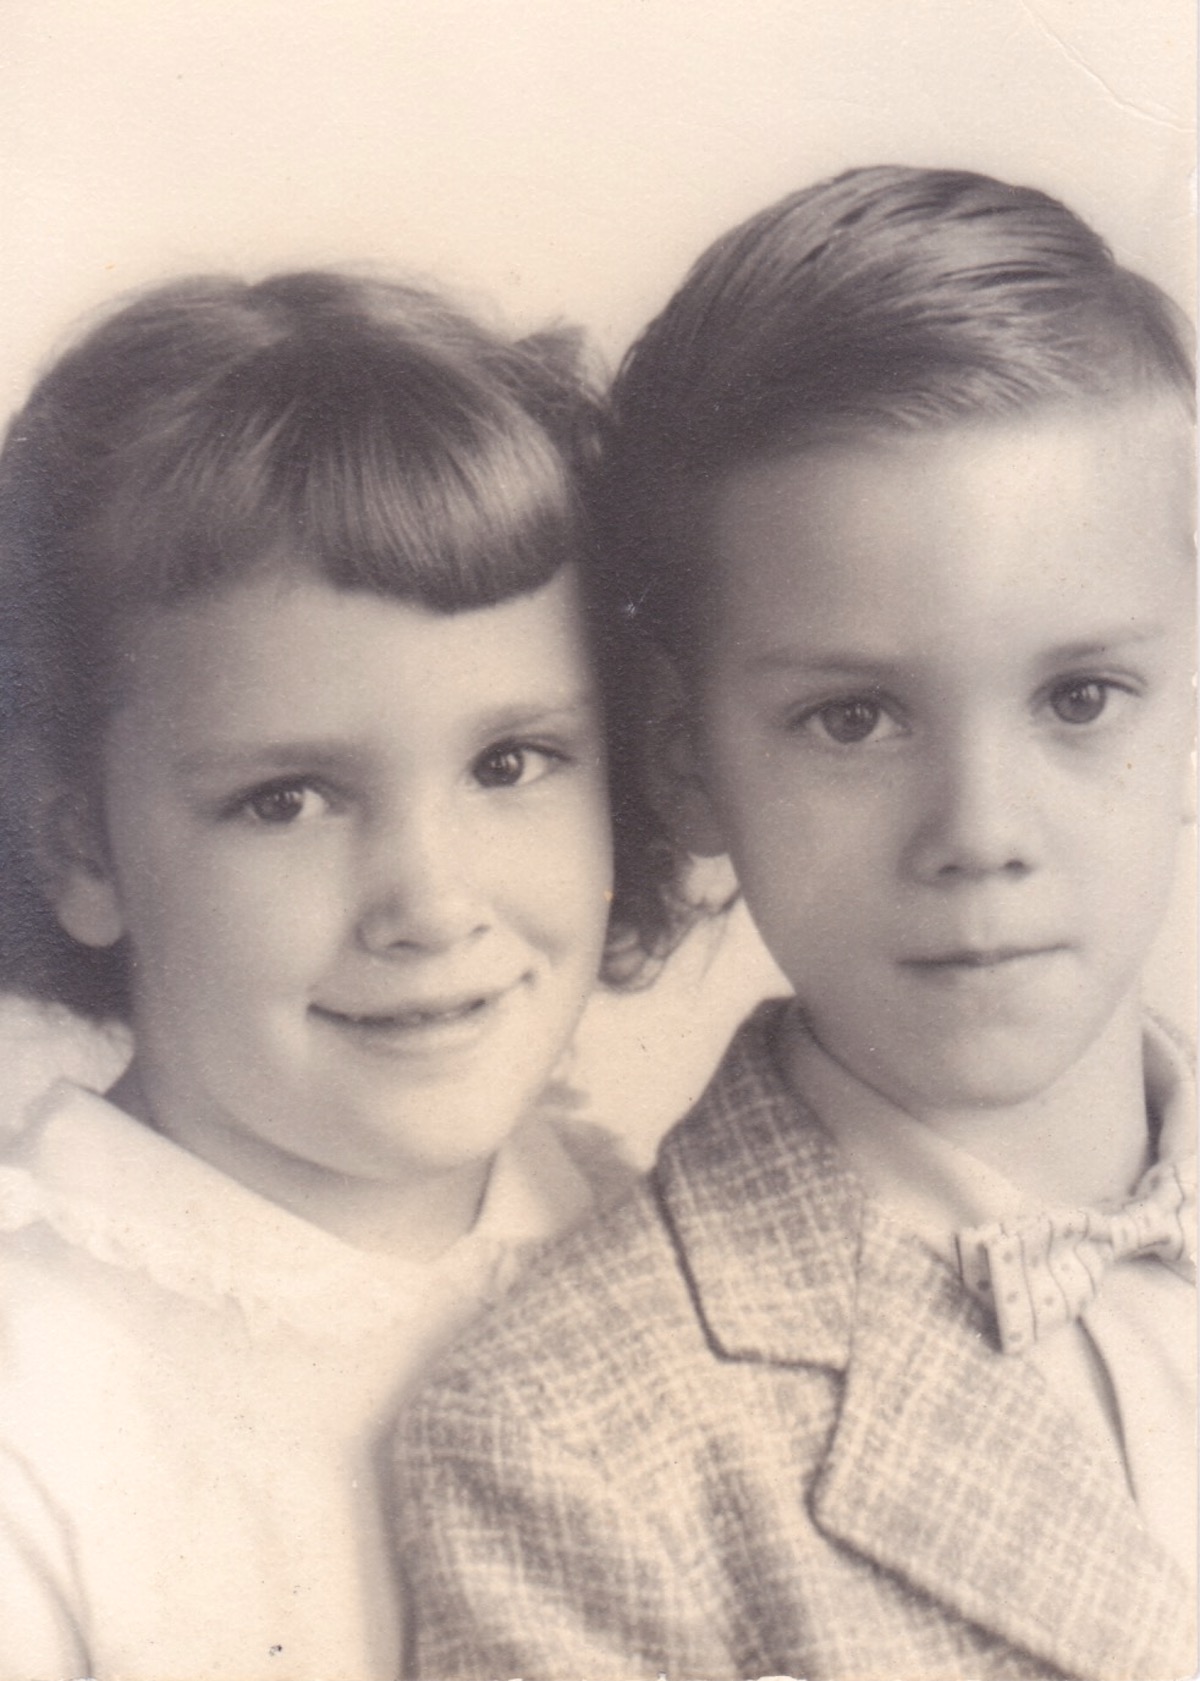 Donna and her twin brother, David.